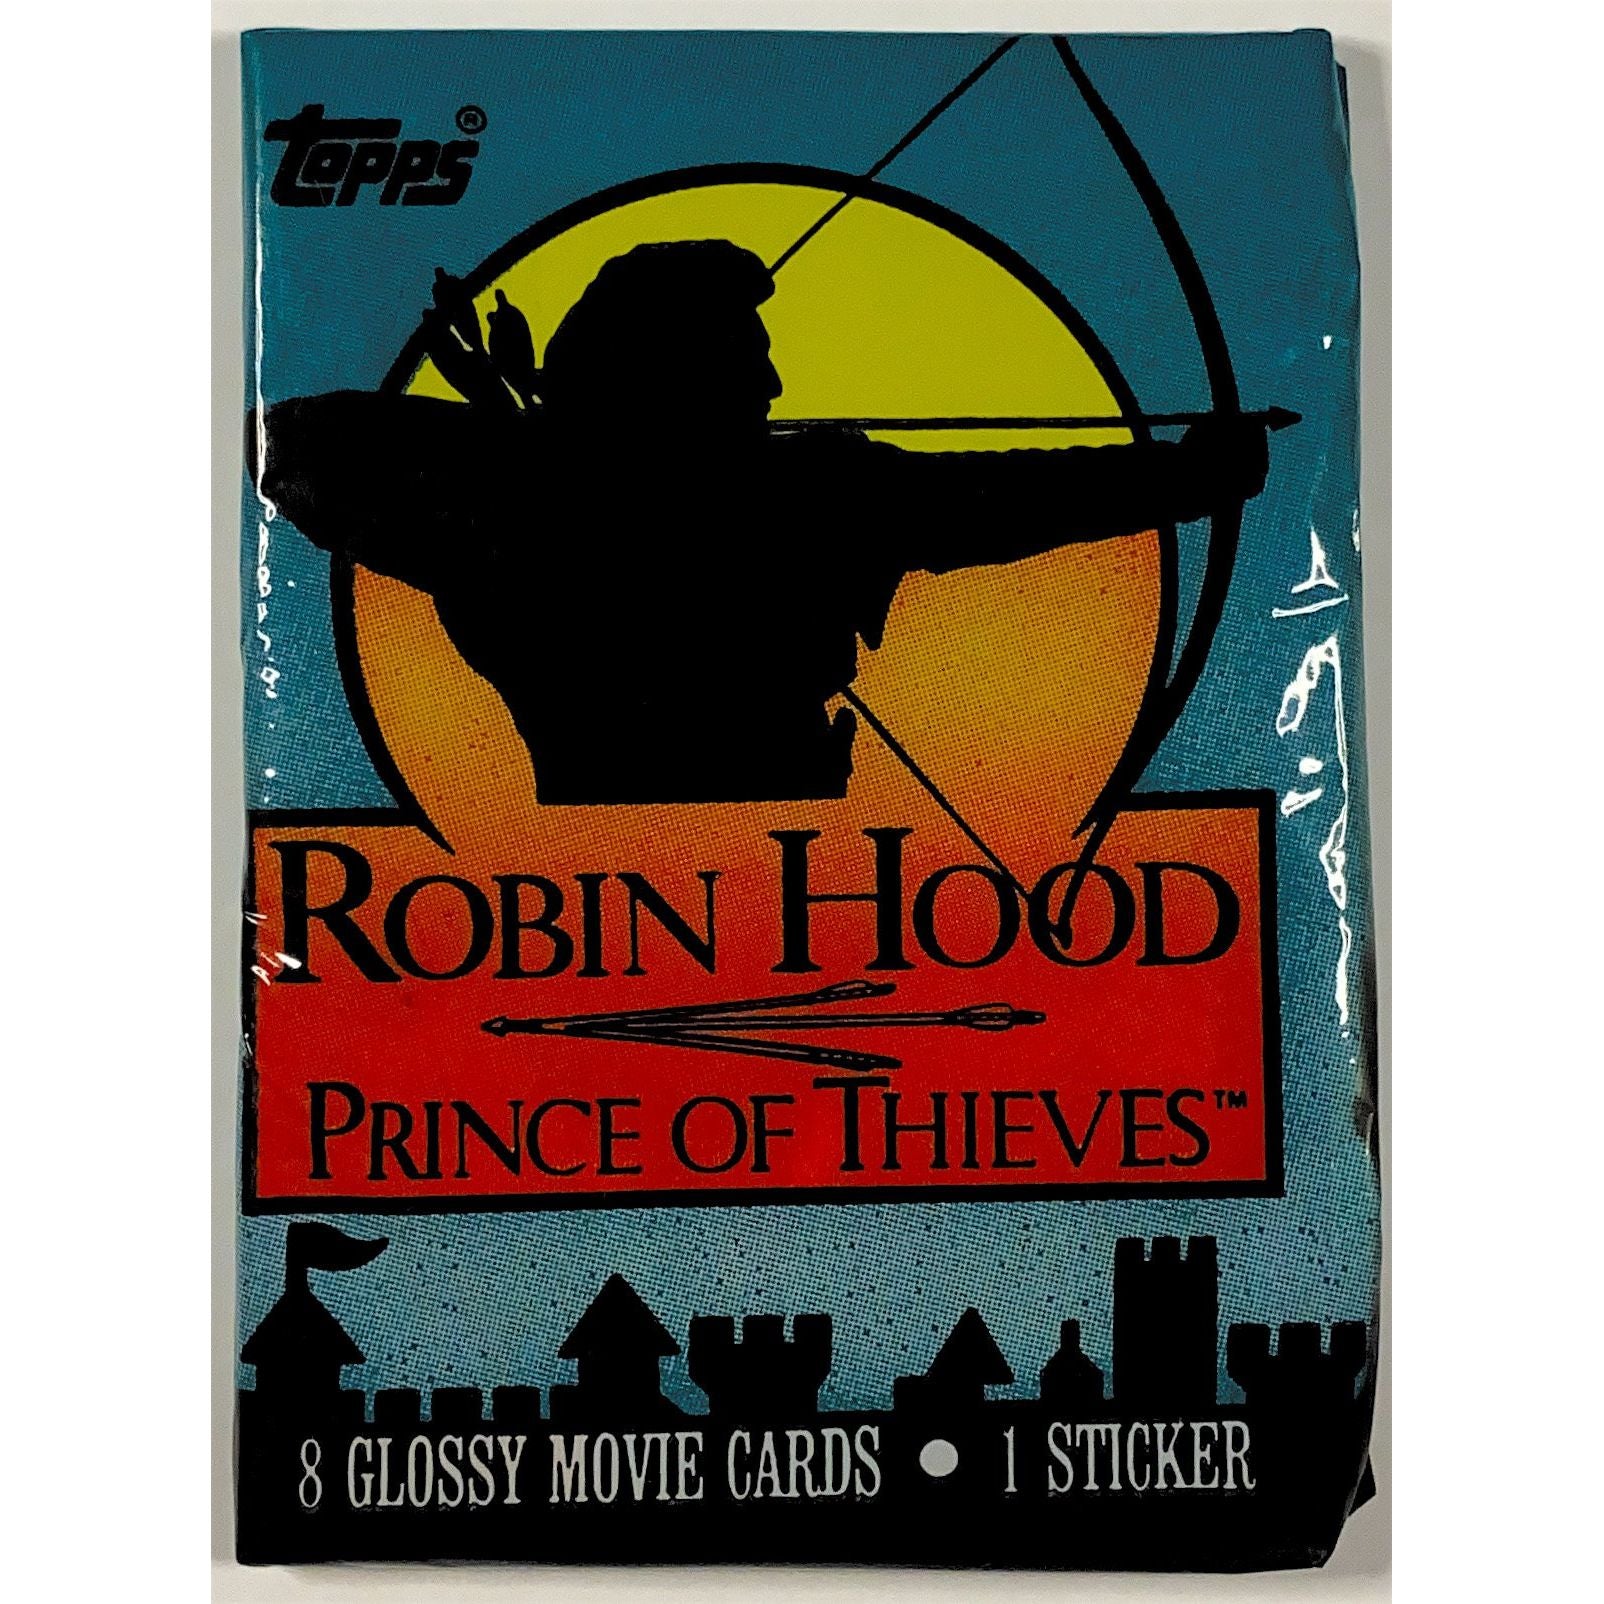  1991 Topps Warner Bros. Robin Hood Prince of Thieves Pack  Local Legends Cards & Collectibles